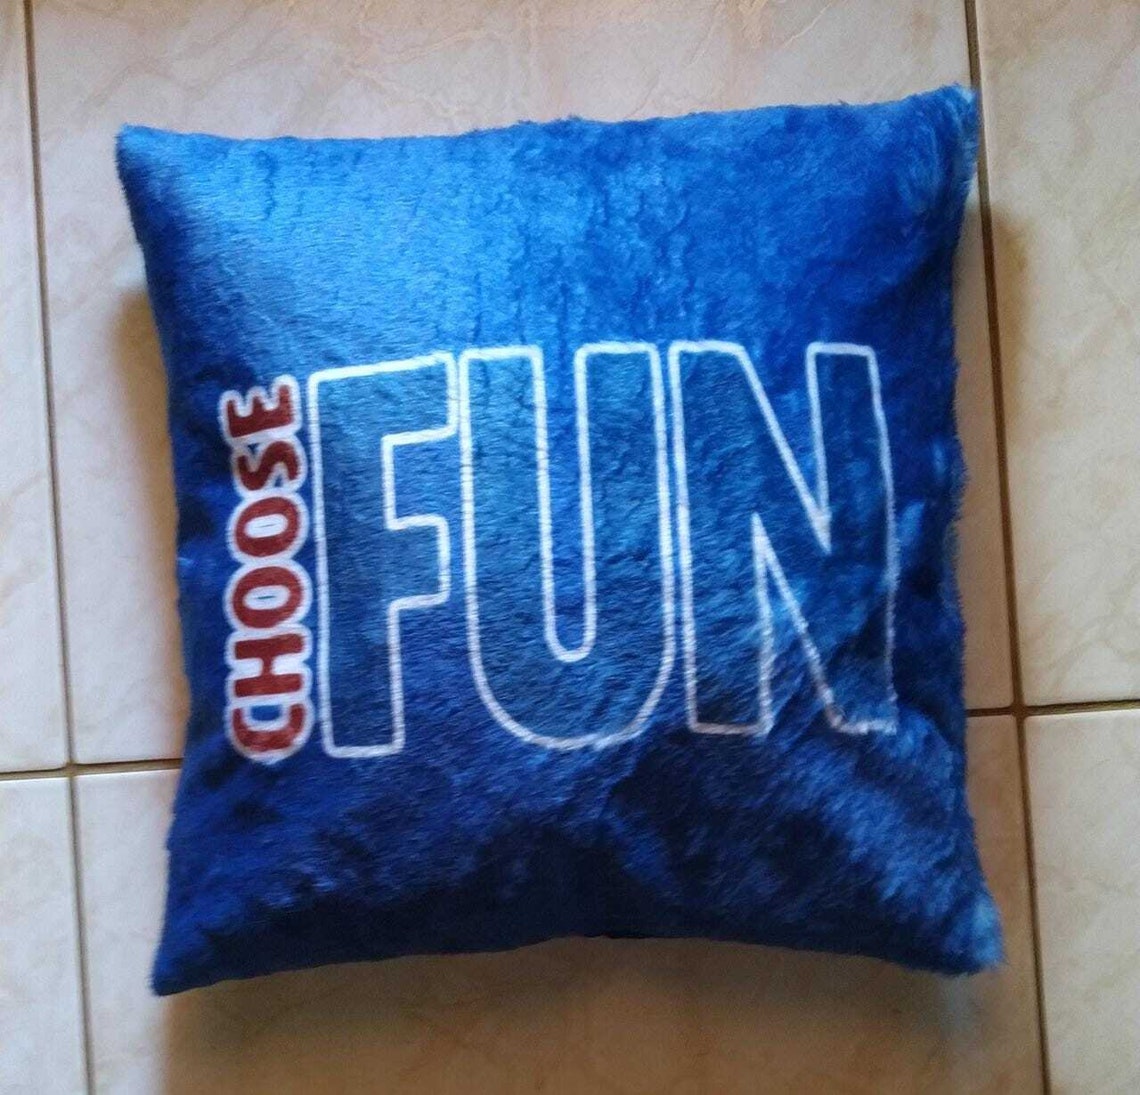 carnival cruise line pillows